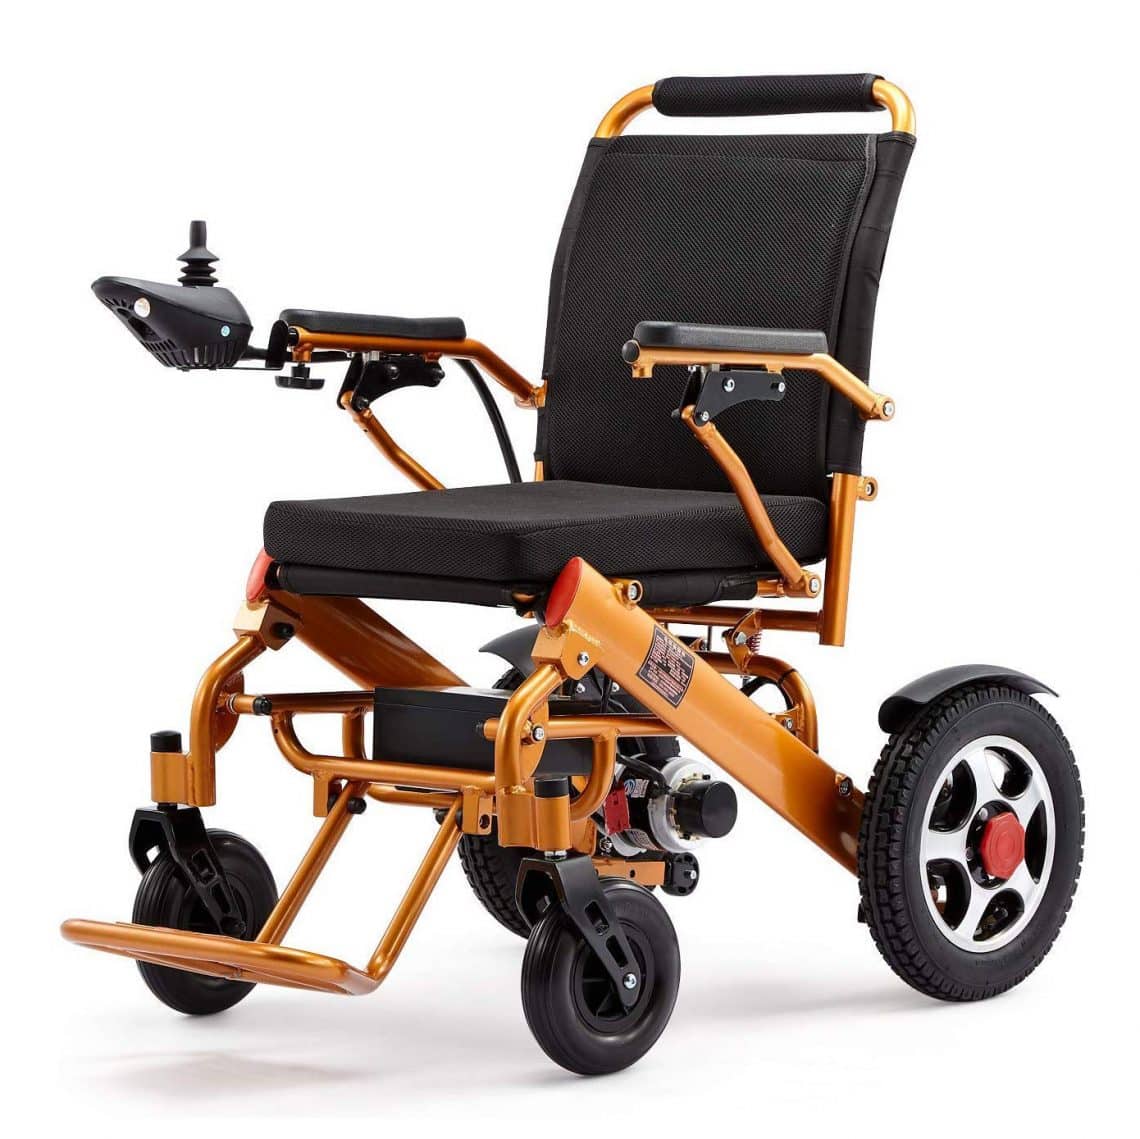 Top 10 Best Folding Electric Wheelchairs in 2021 Reviews Buyer's Guide